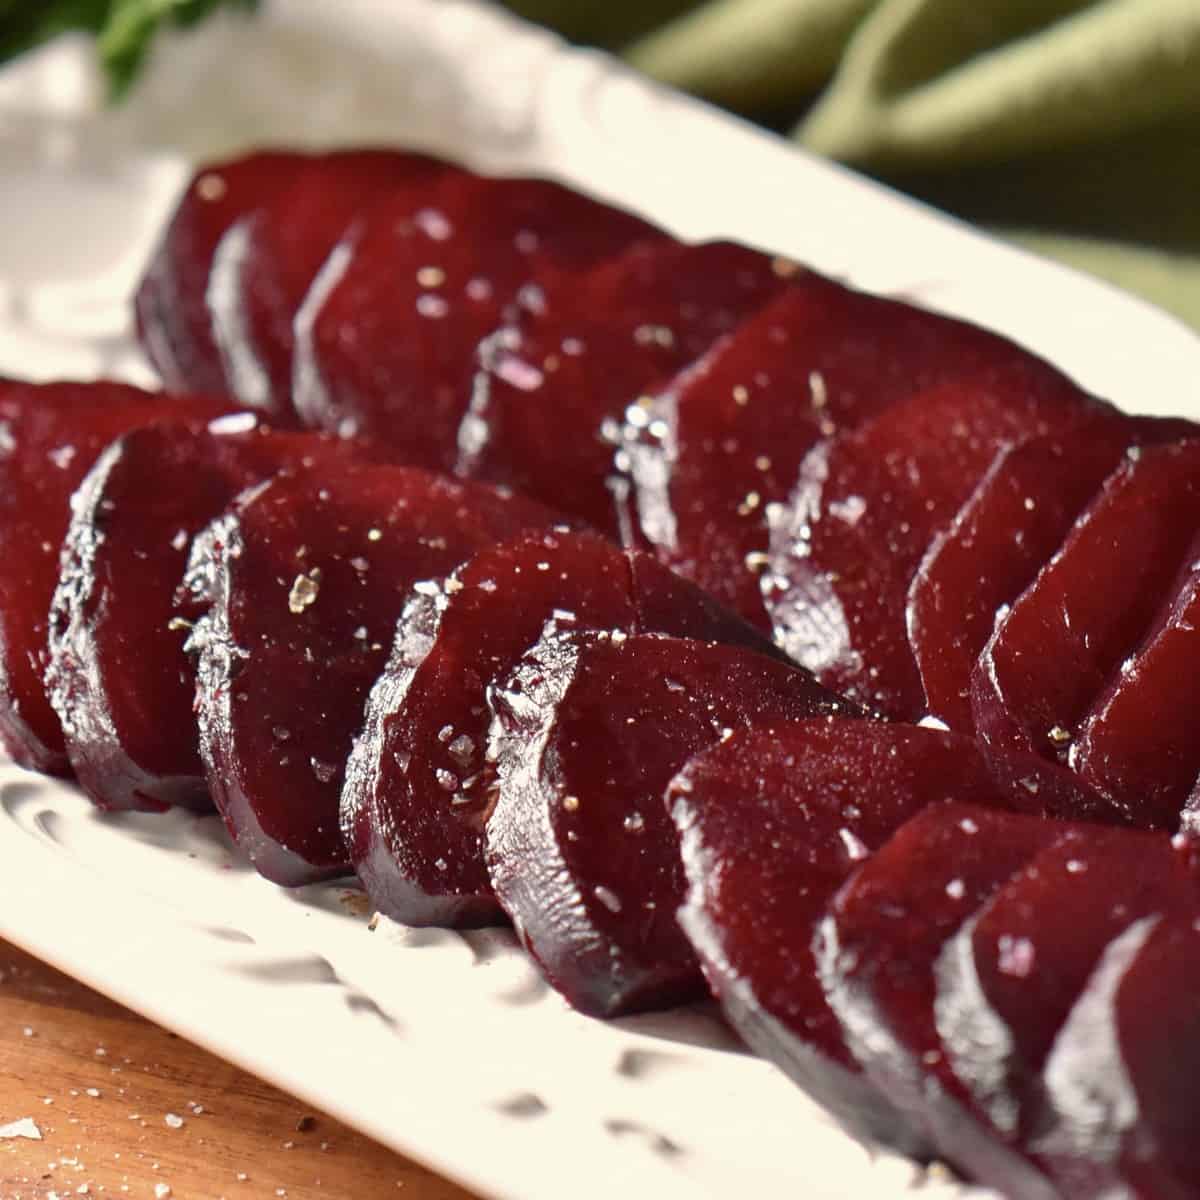 Sliced roasted beets on a white serving platter.